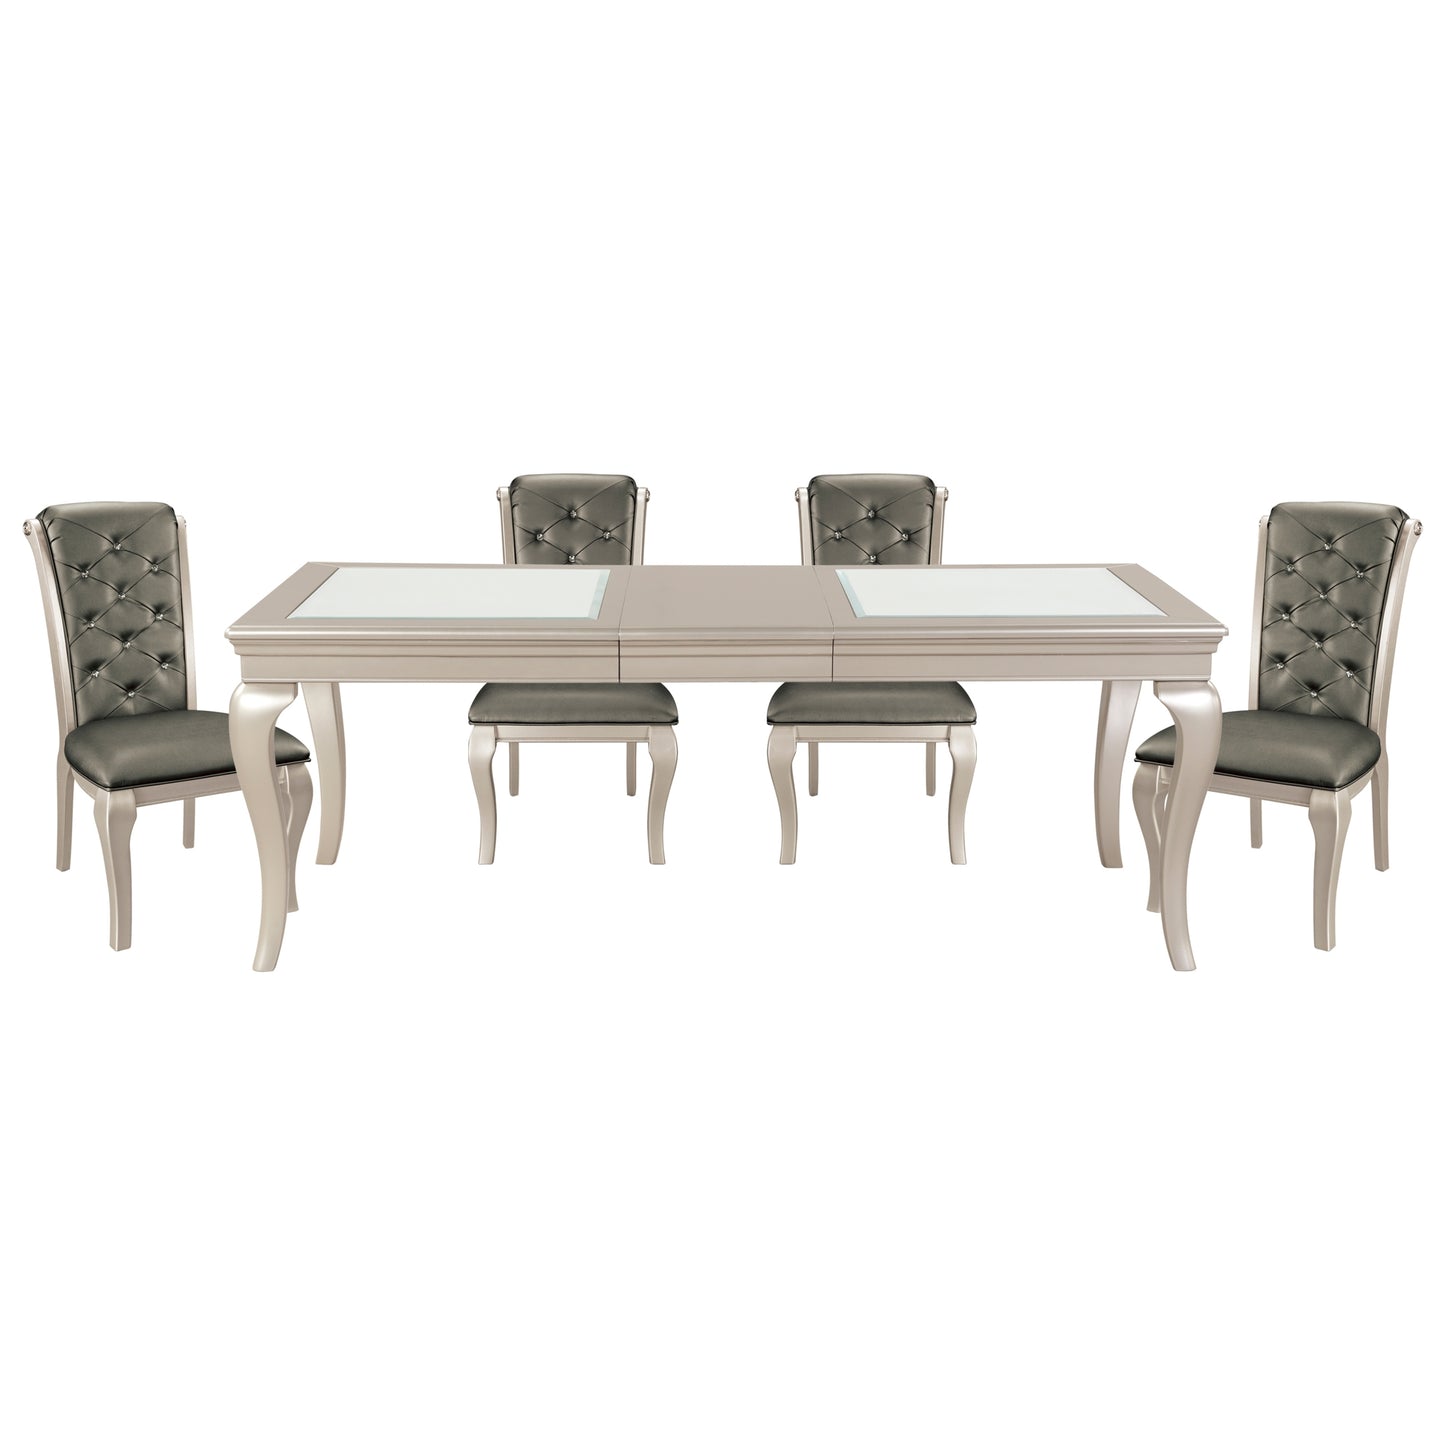 Modern Glamourous 1pc Dining Table with Separate Extension Leaf Cabriole Legs Insert Glass Panels Traditional Furniture